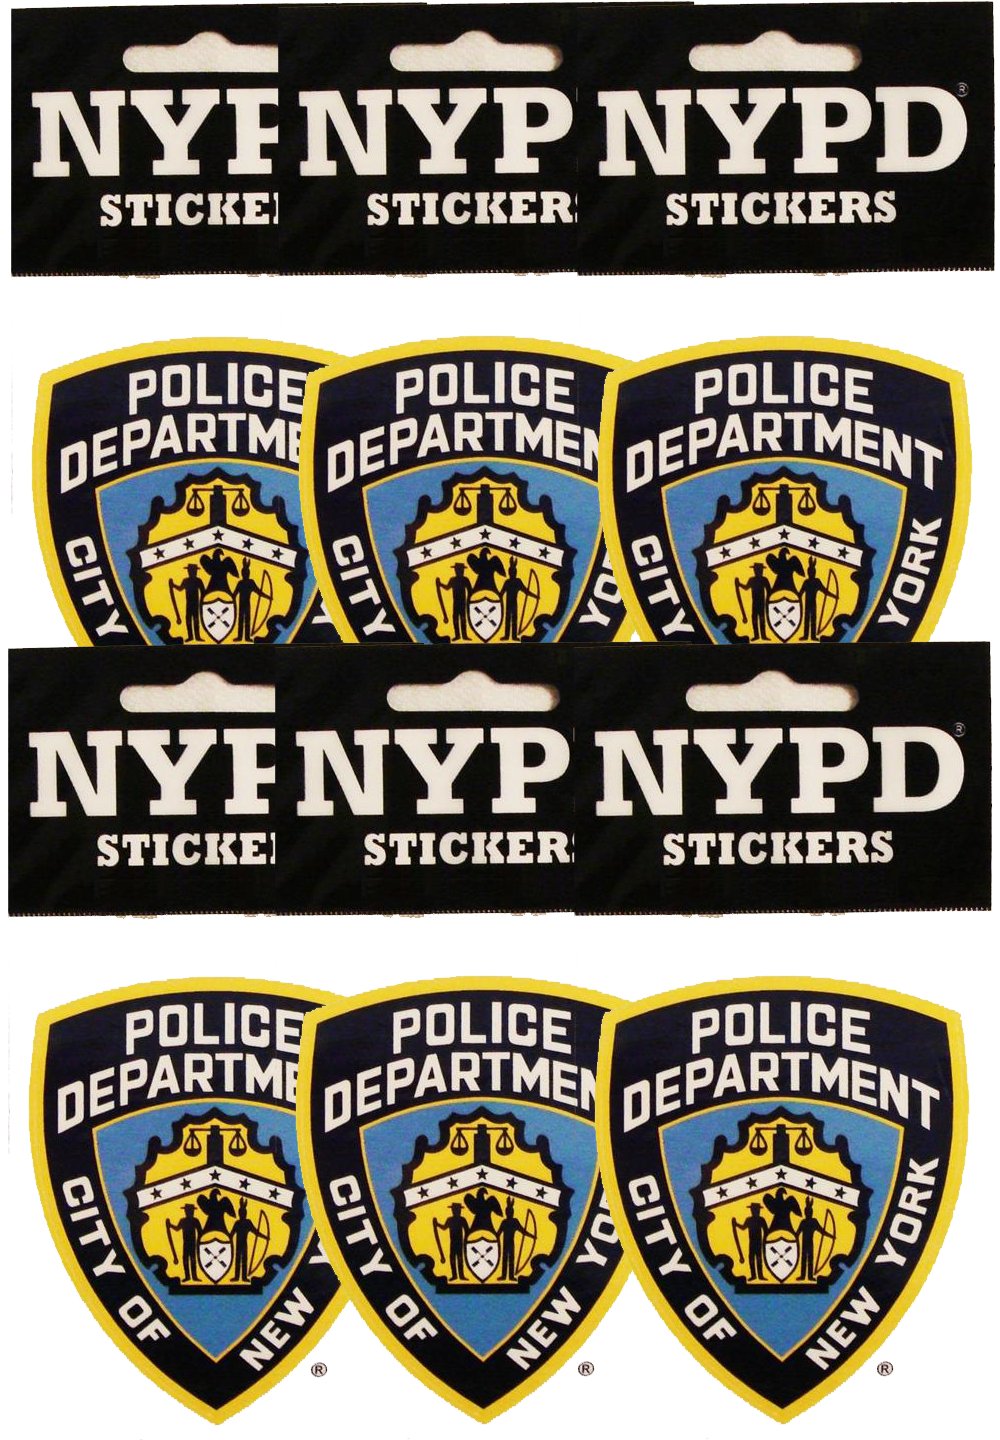 NYPD Sticker Car Window Bumper Decal Officially Licensed